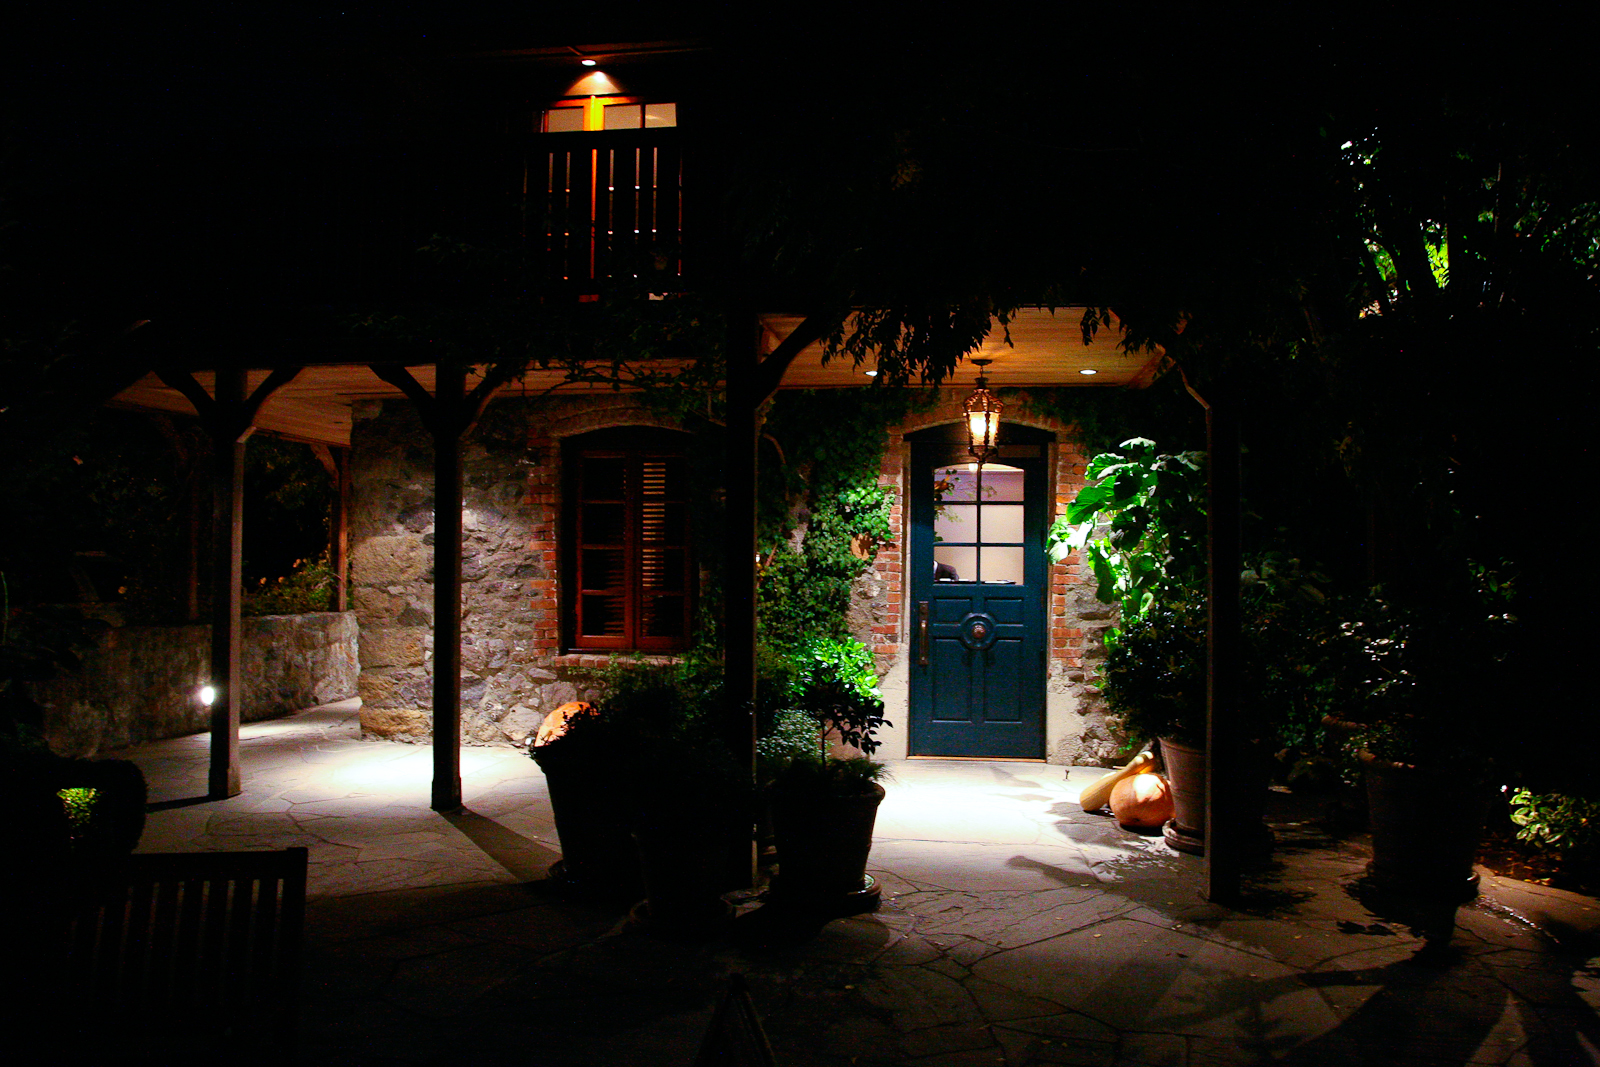 Entrance to The French Laundry